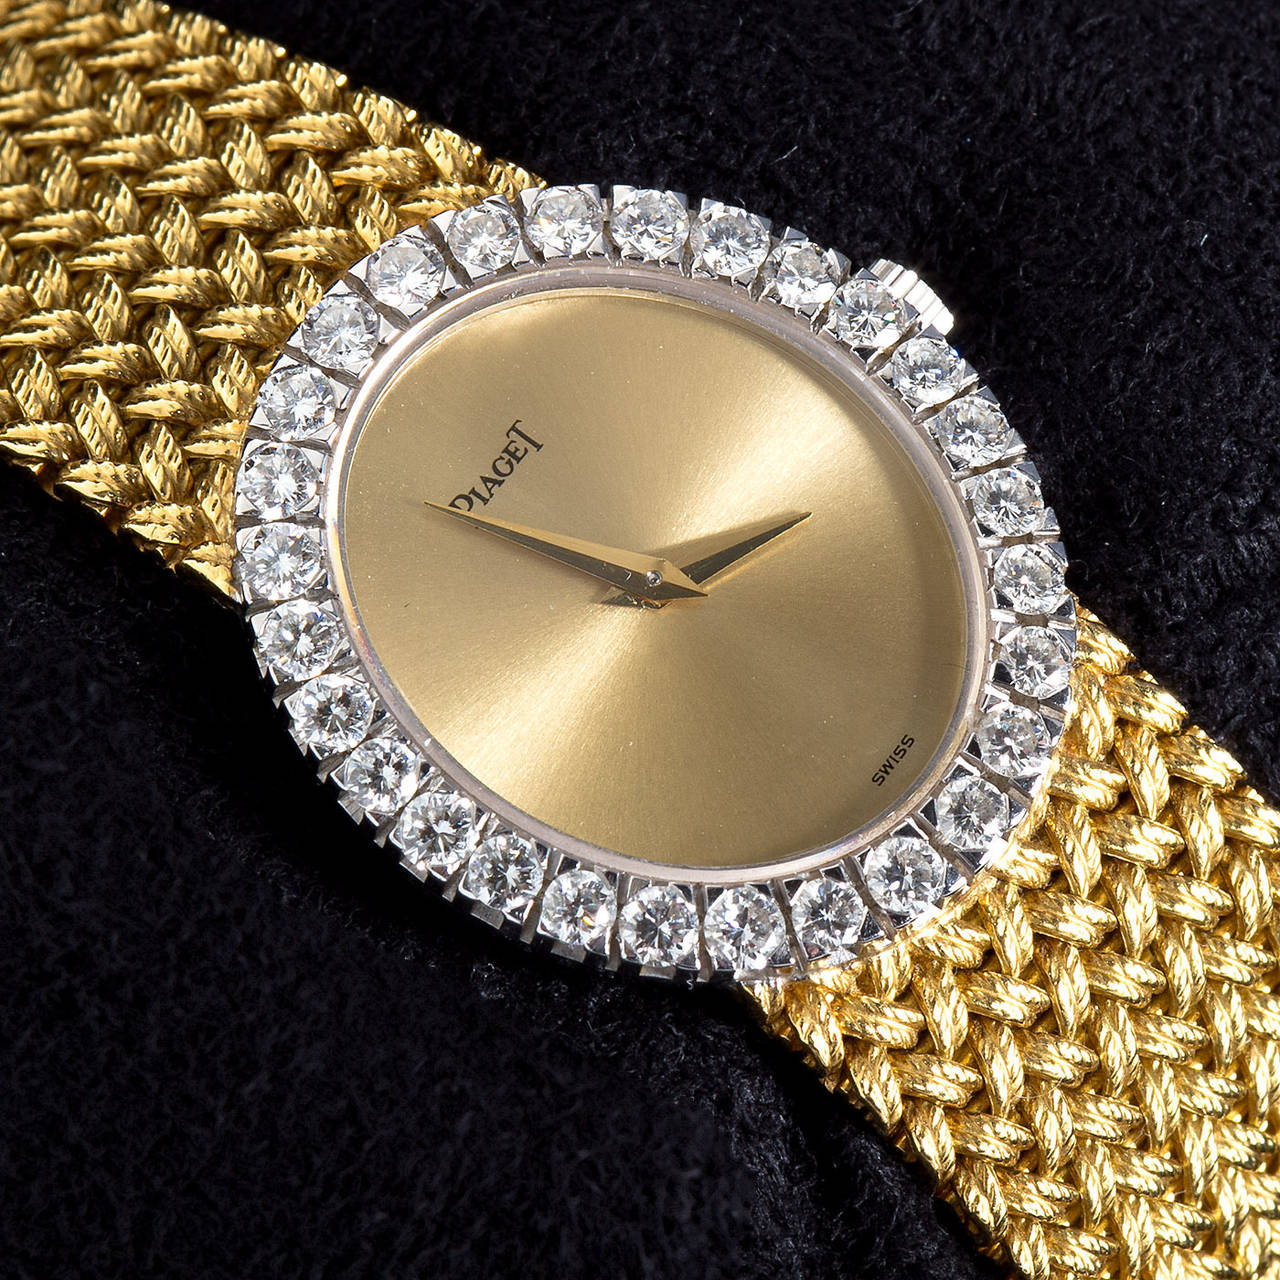 A wonderful rare Piaget woven textured 18 karat gold  bracelet diamond set oval watch. The dial is satin gold and surrounded by over 1.70 carats of 28  fine color bright F color VS quality diamonds. The bracelet is in excellent condition and appears